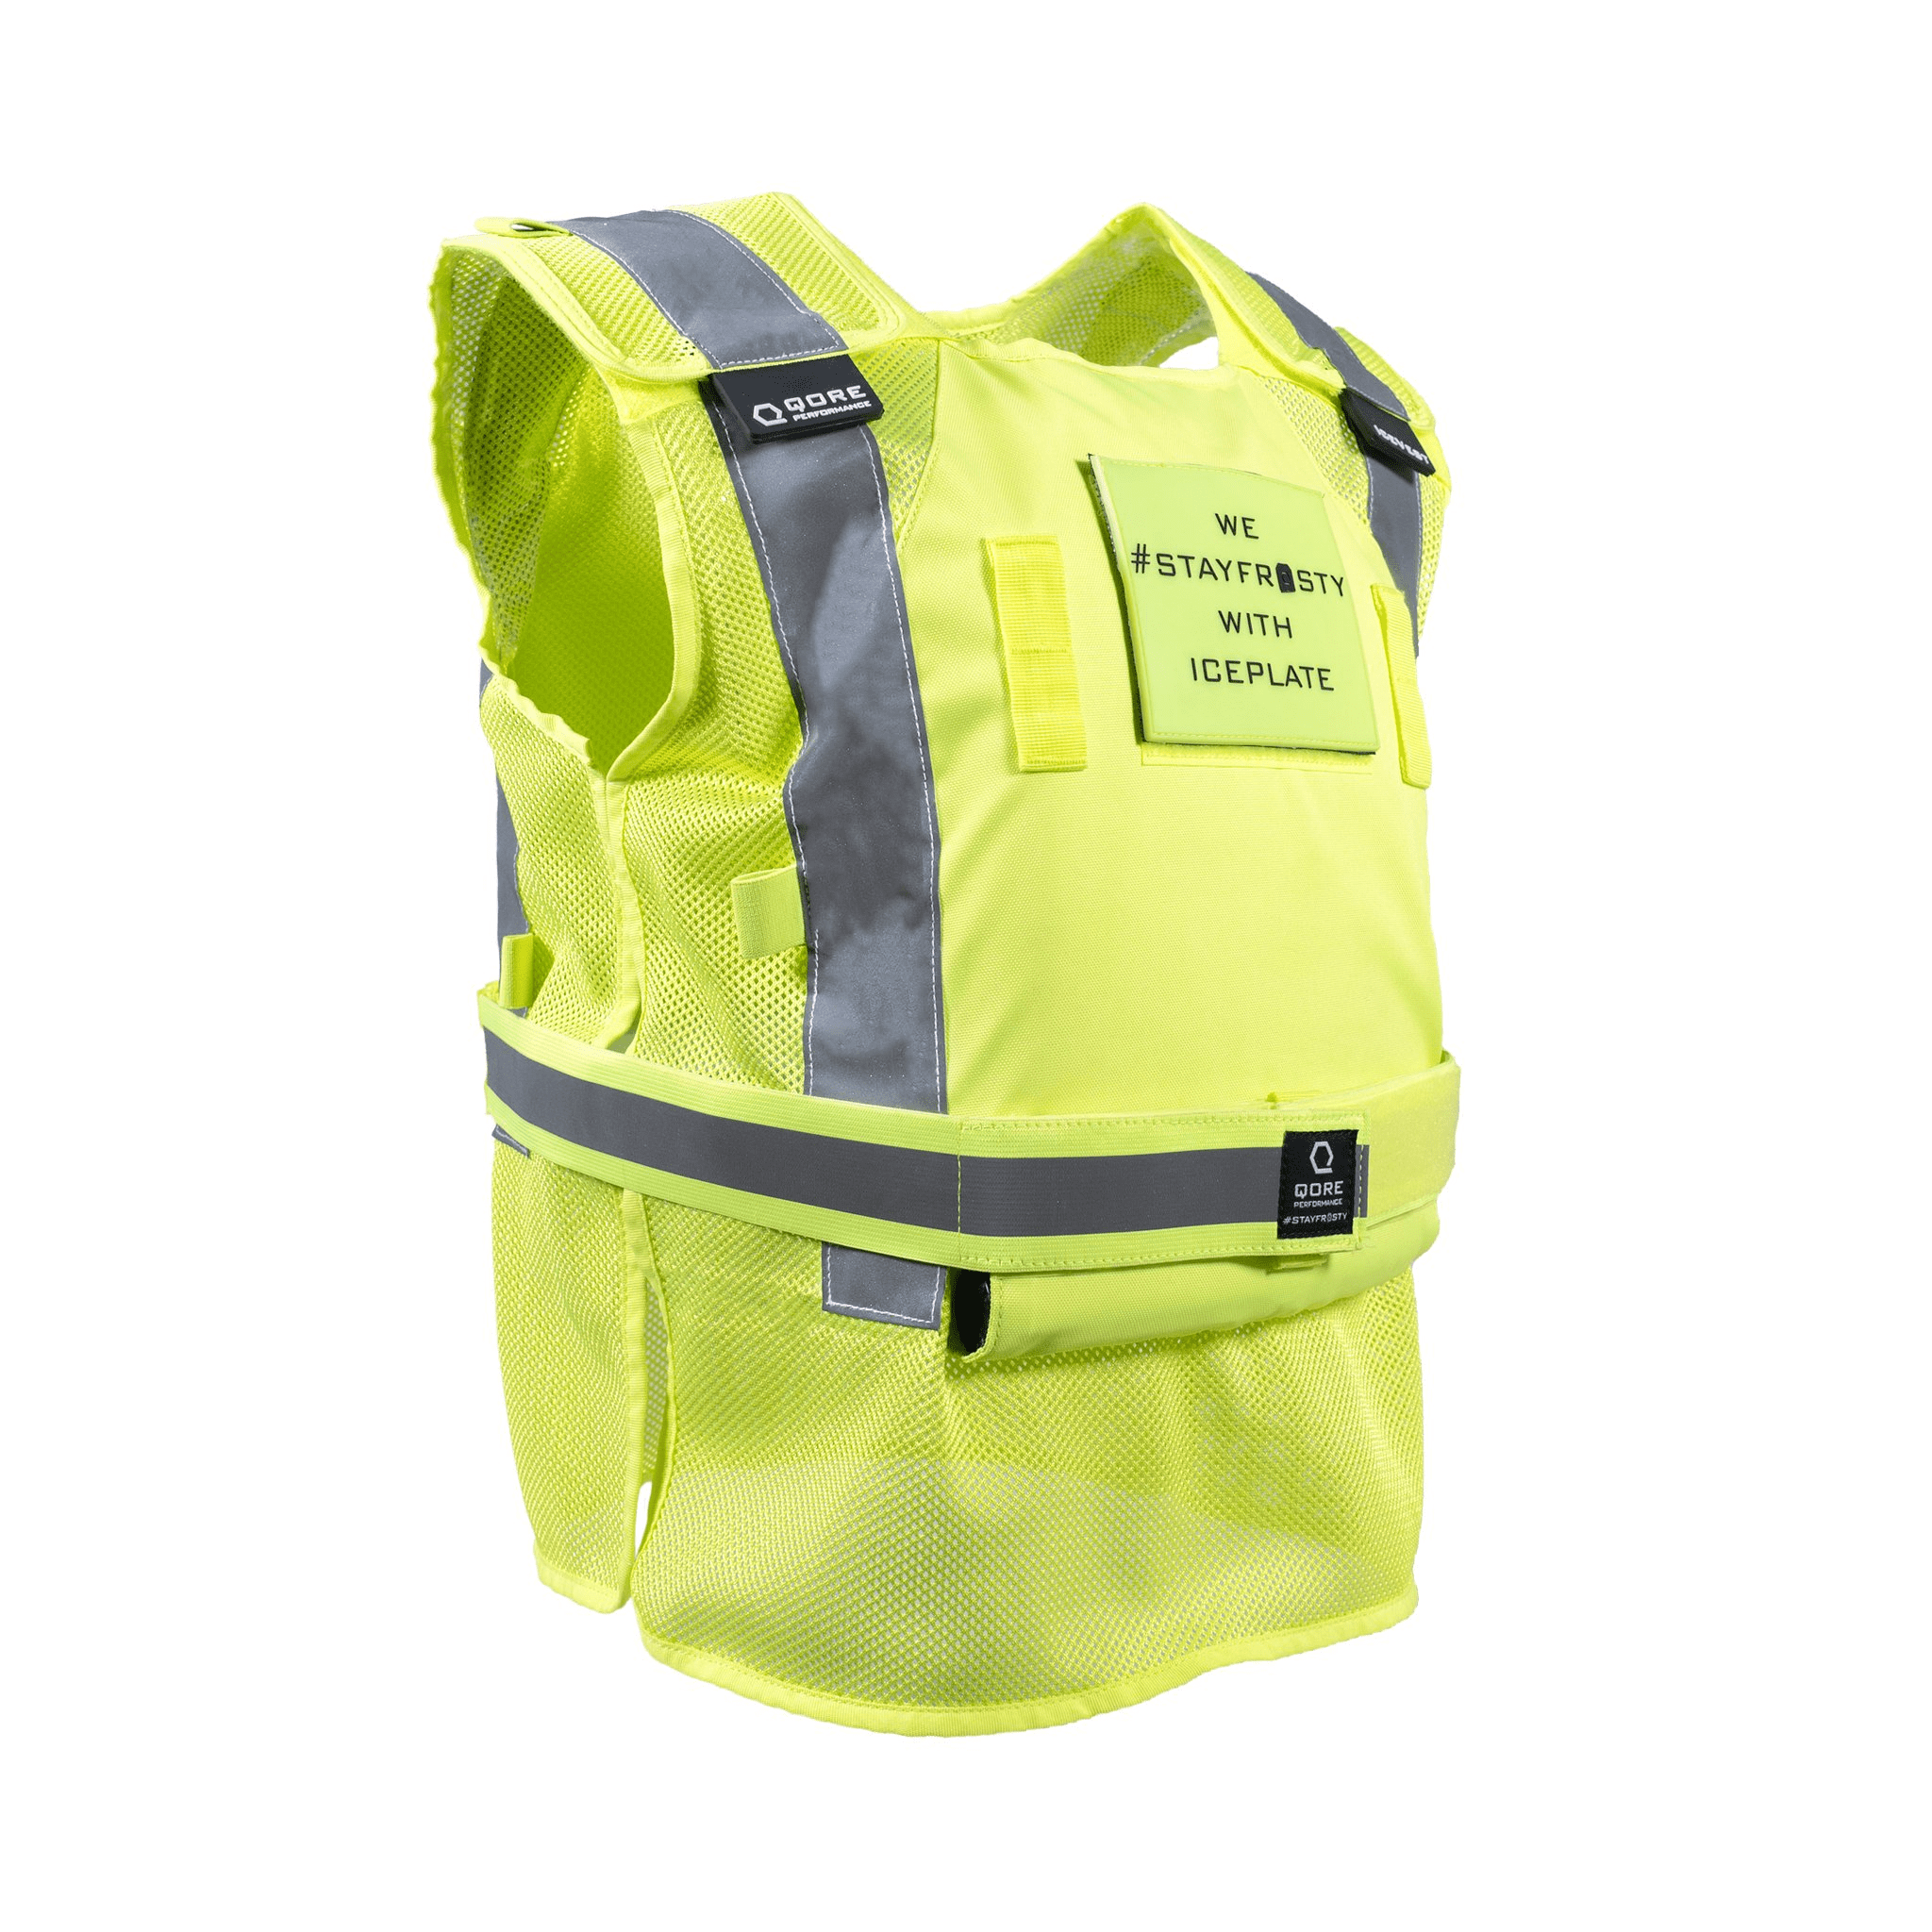 Wholesale Cooling Vest with Reflective Material for Safety